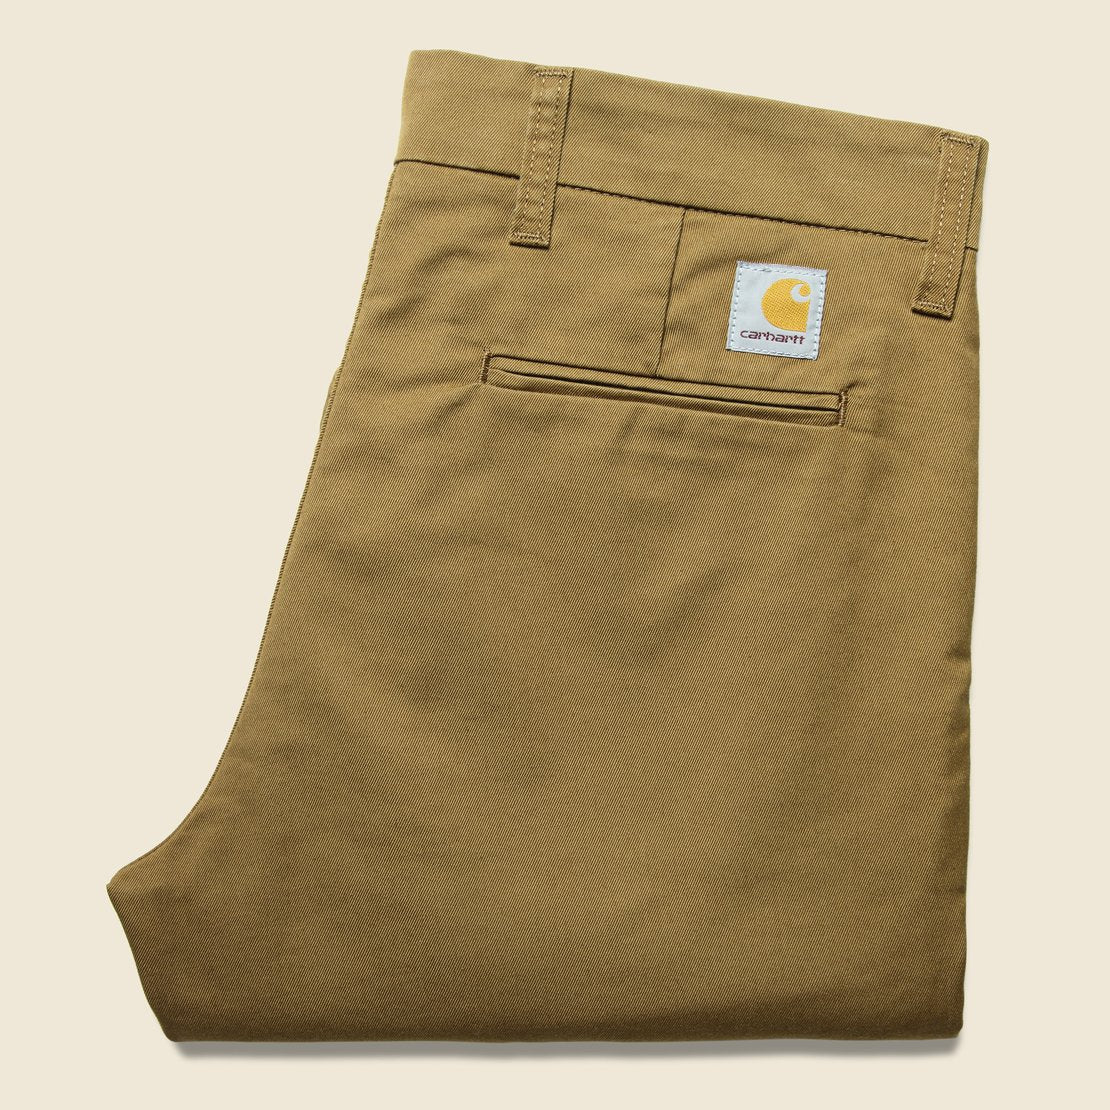 Sid Pant - Hamilton Brown - Carhartt WIP - STAG Provisions - Pants - Twill